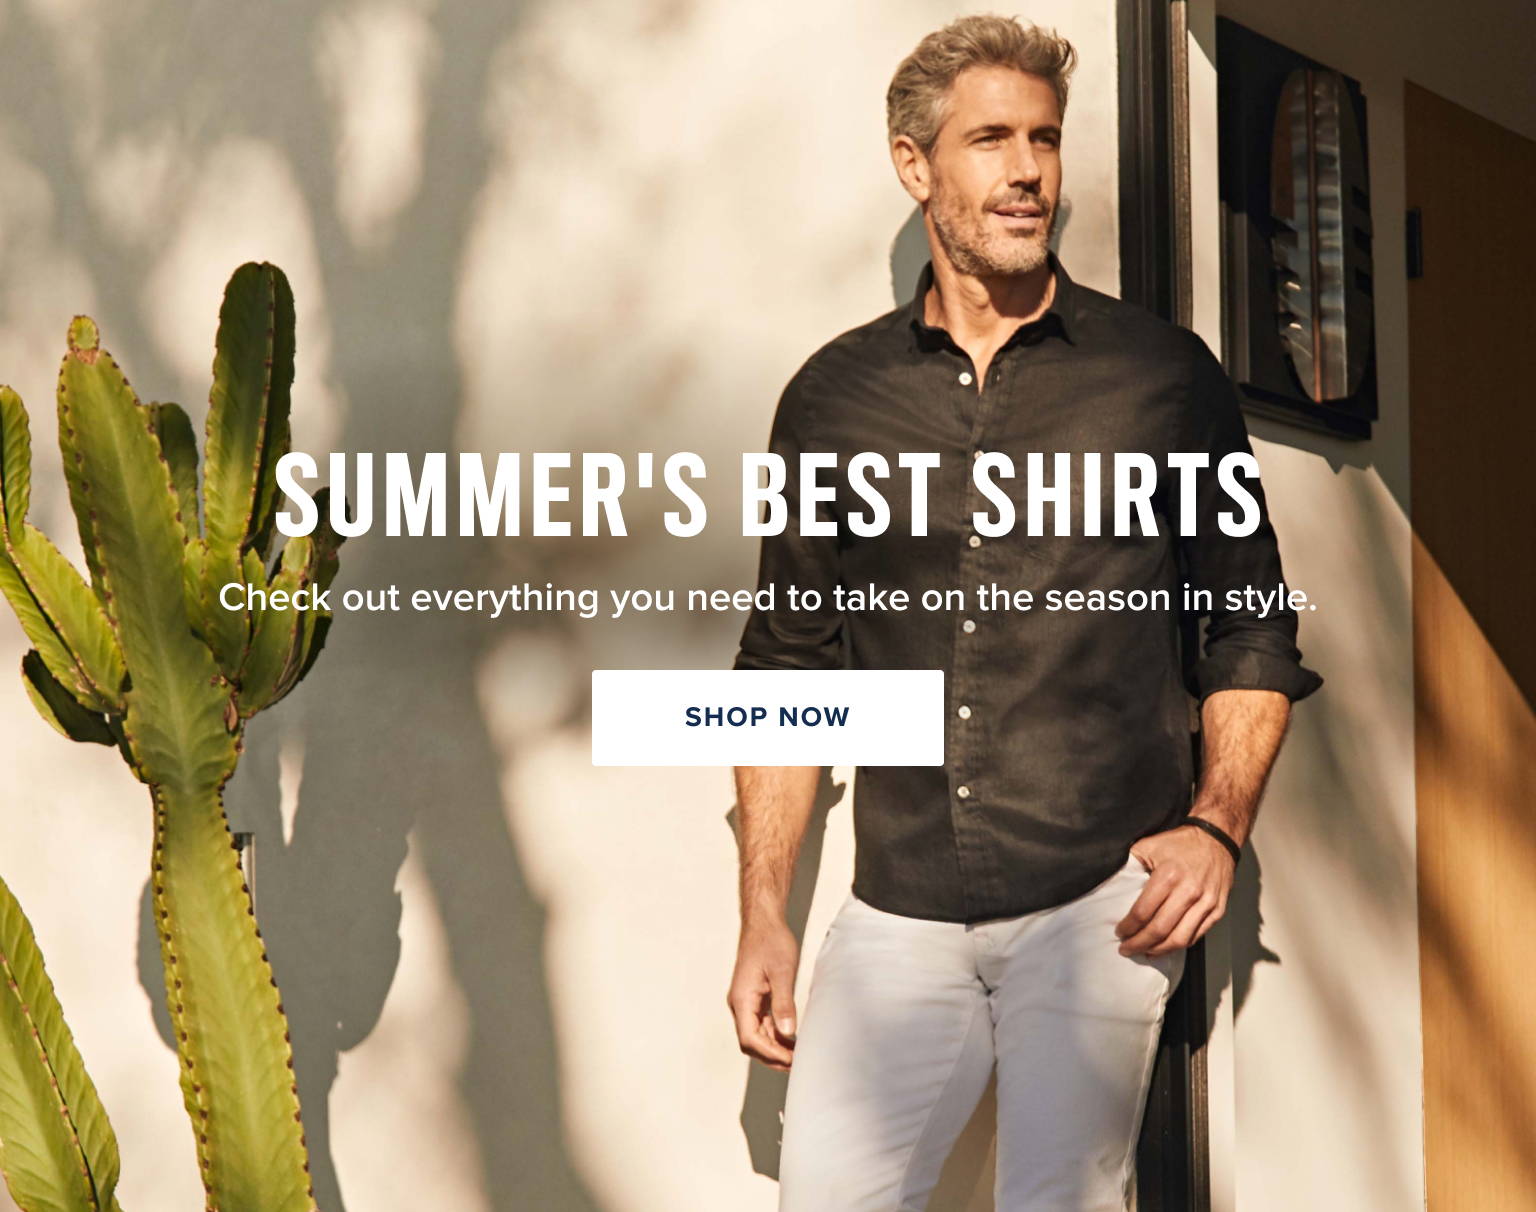 Summer's best shirts. Check out everything you need to take on the season in style.